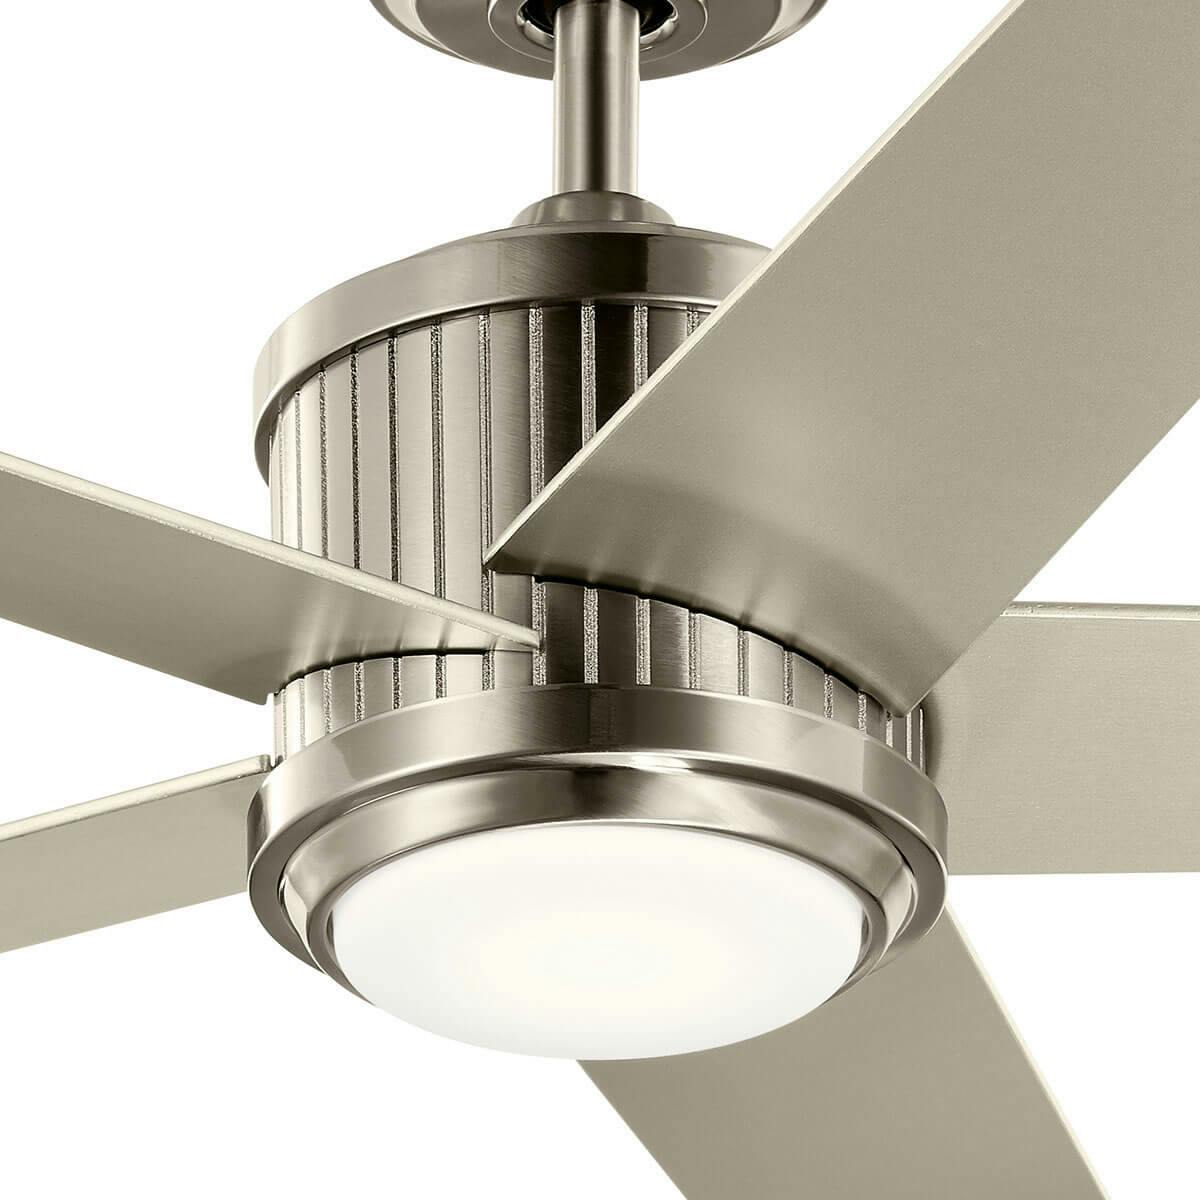 Close up view of the 56” Brahm Ceiling Fan Stainless Steel on a white background